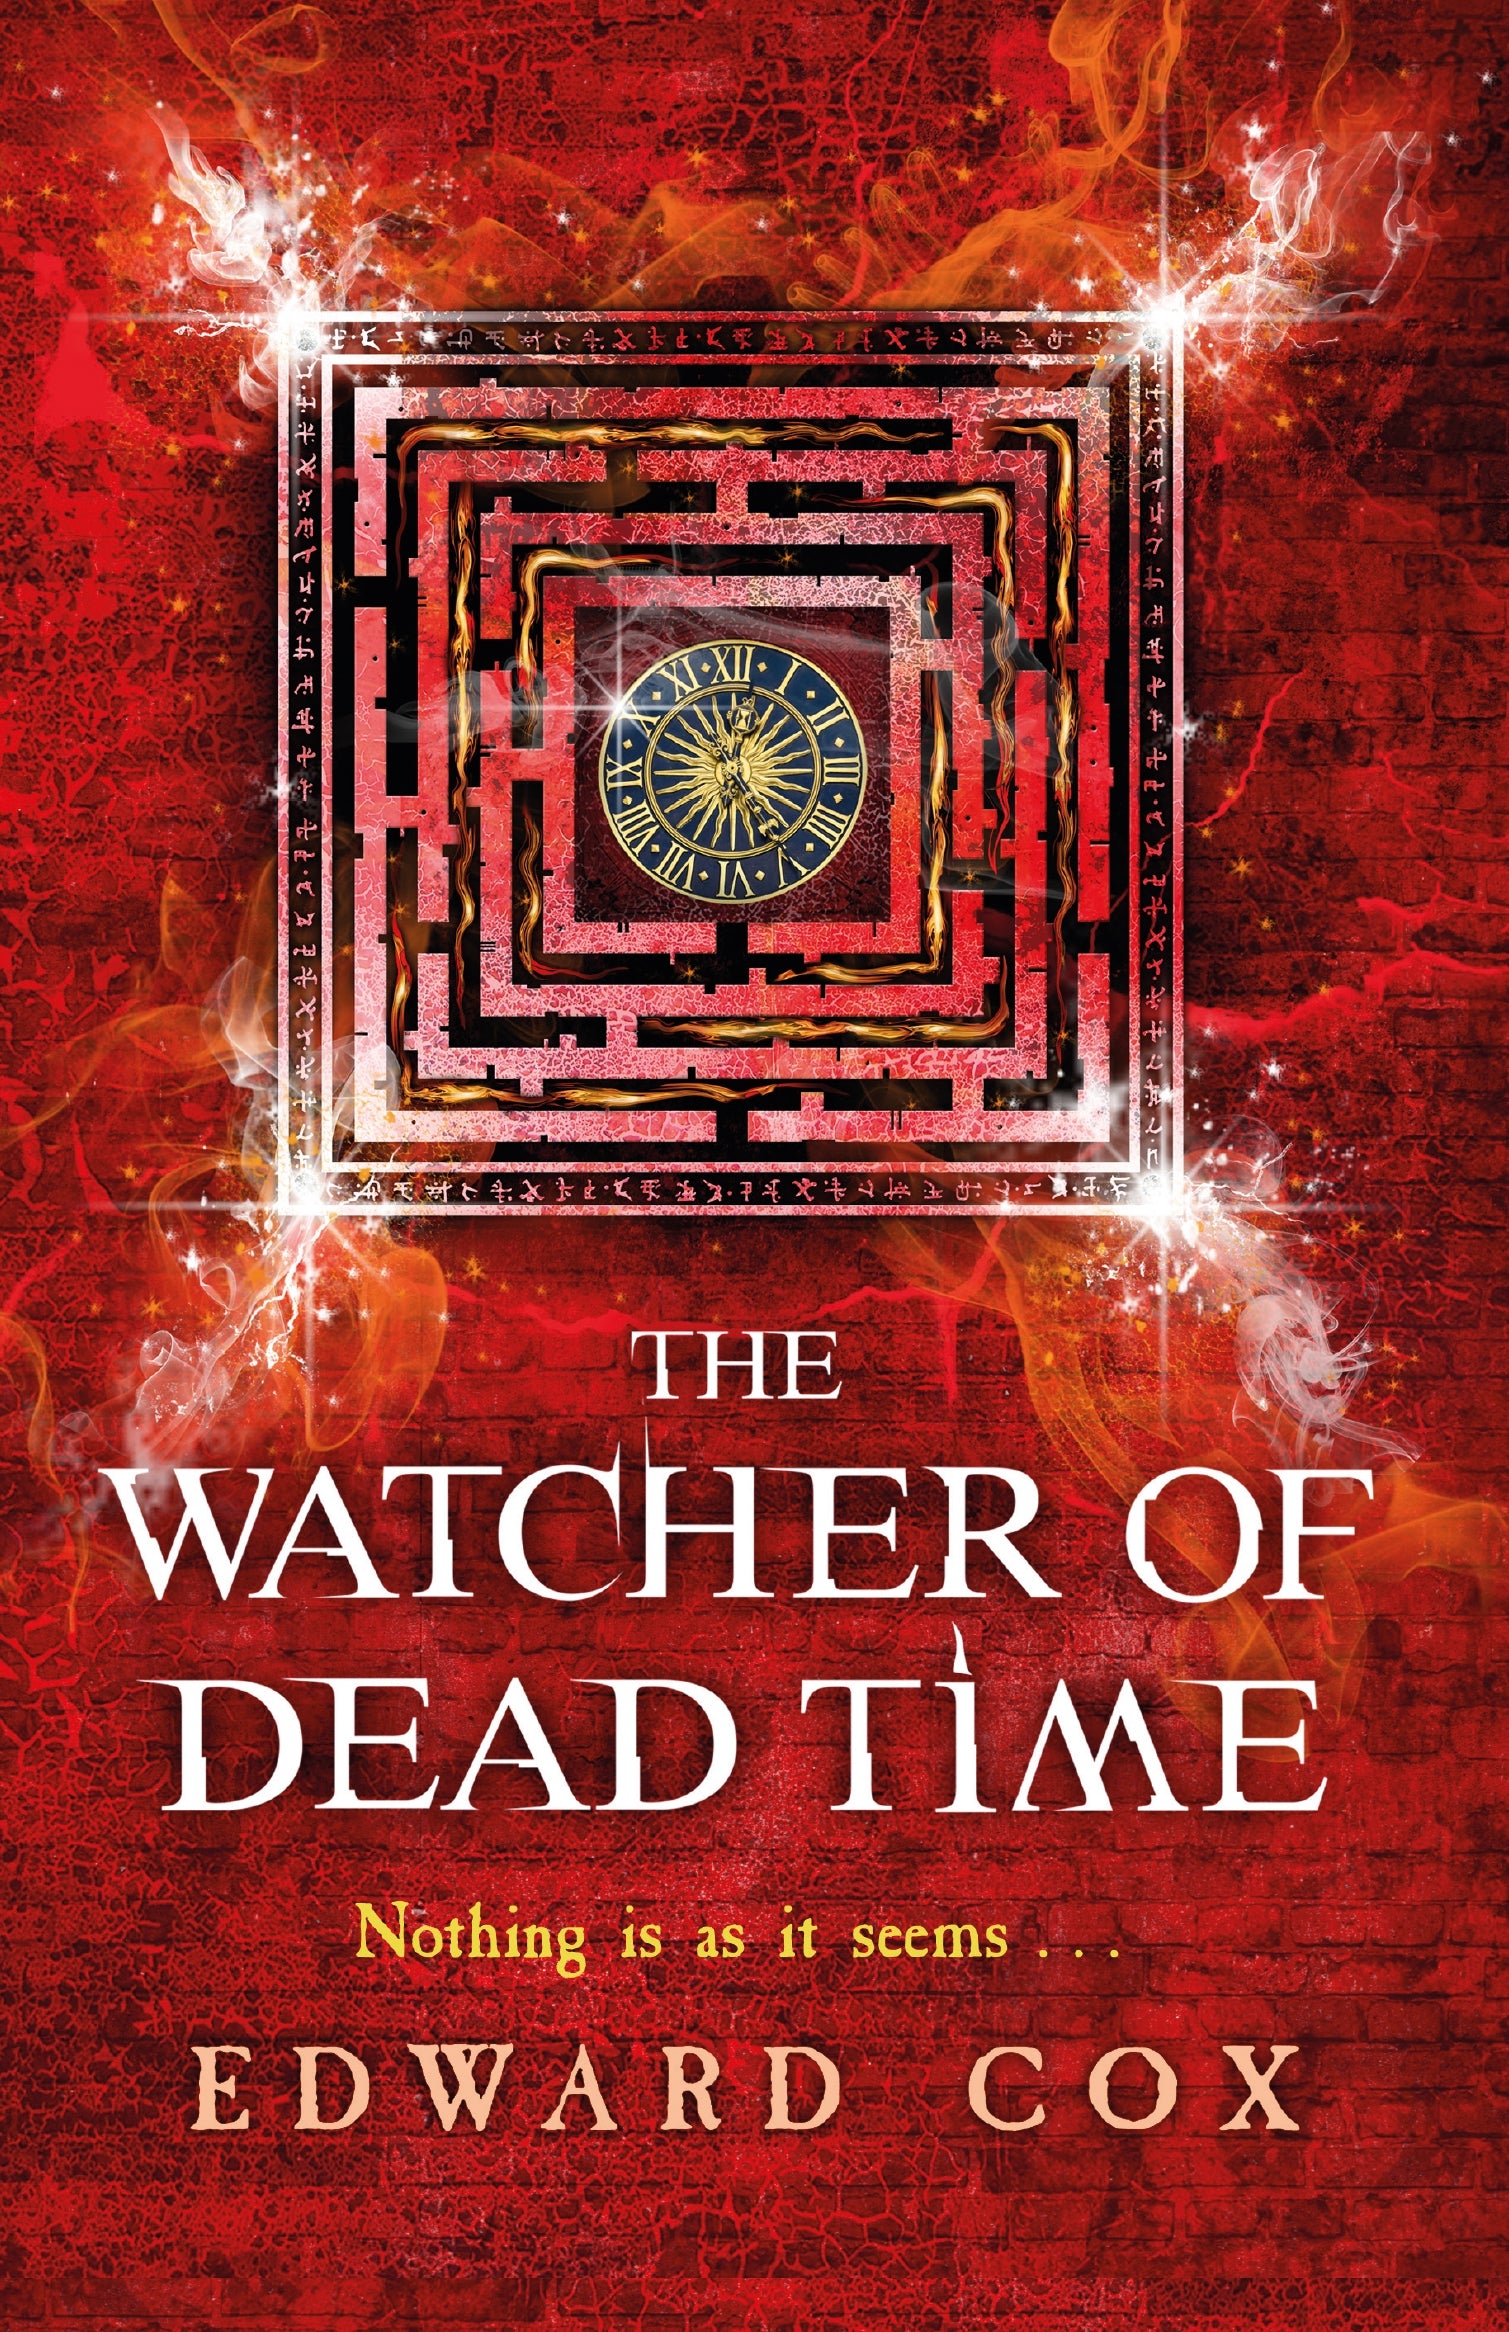 The Watcher of Dead Time by Edward Cox